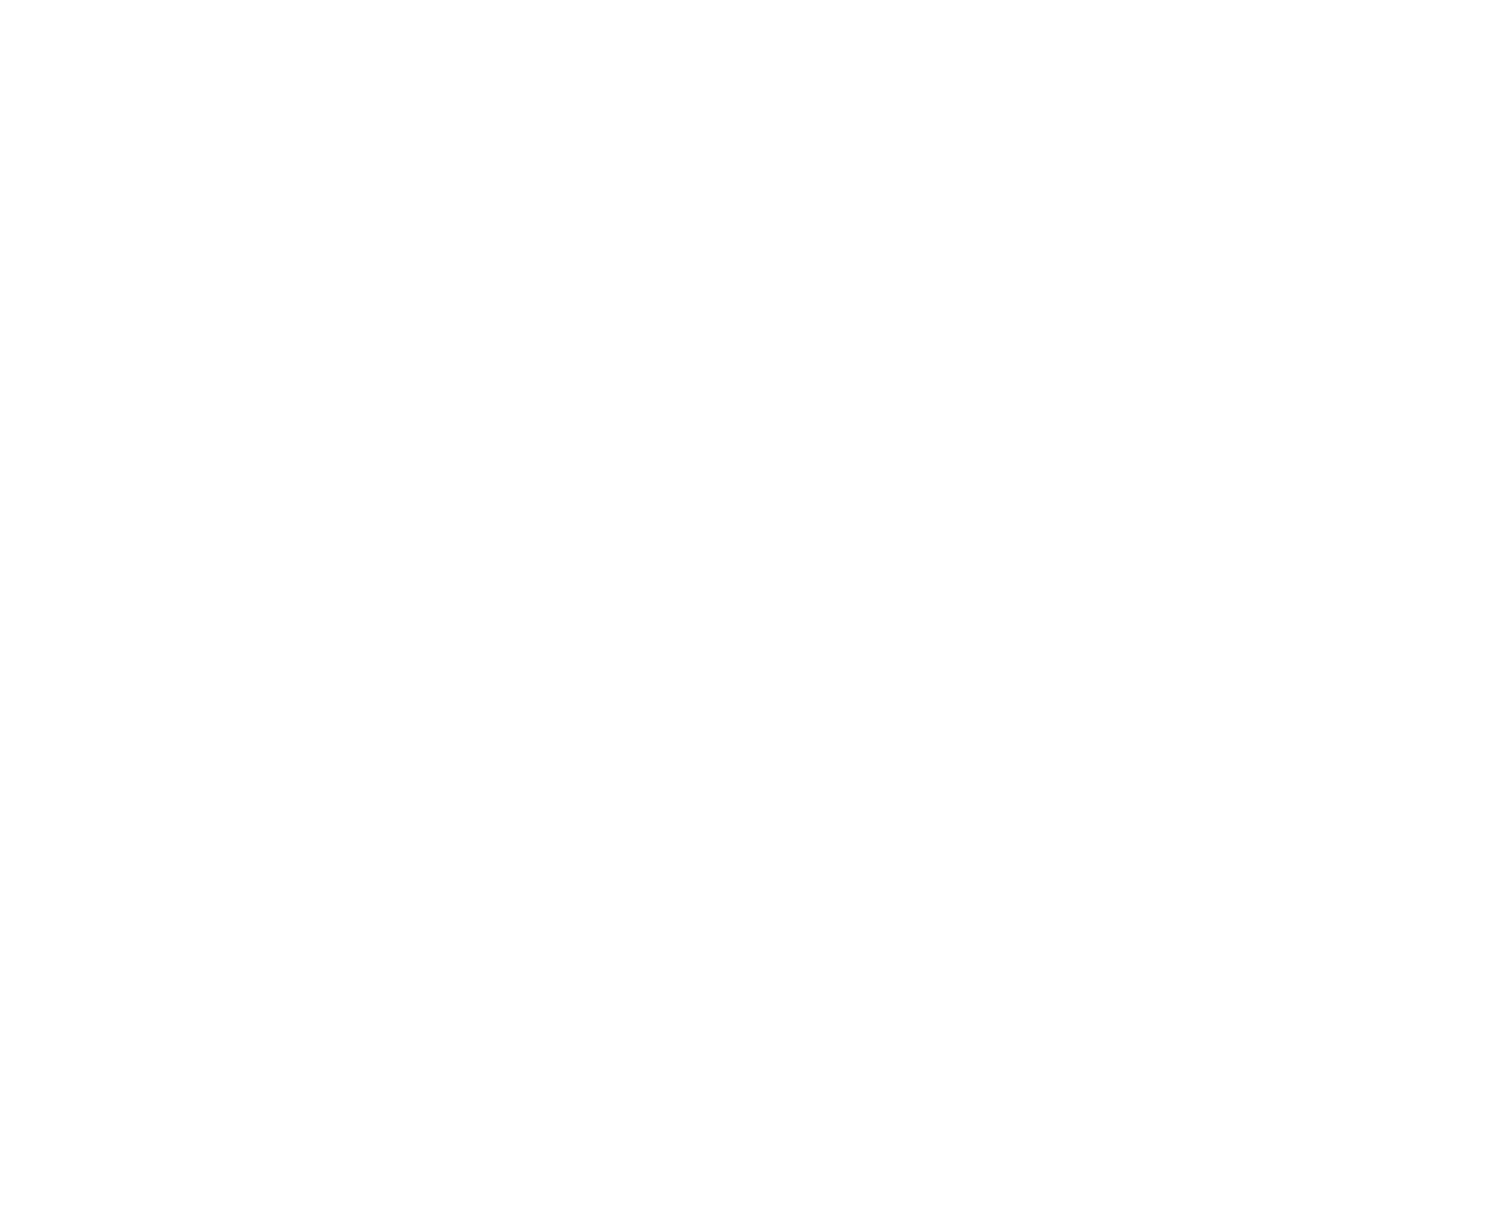 KERRY HODGE PHOTOGRAPHY